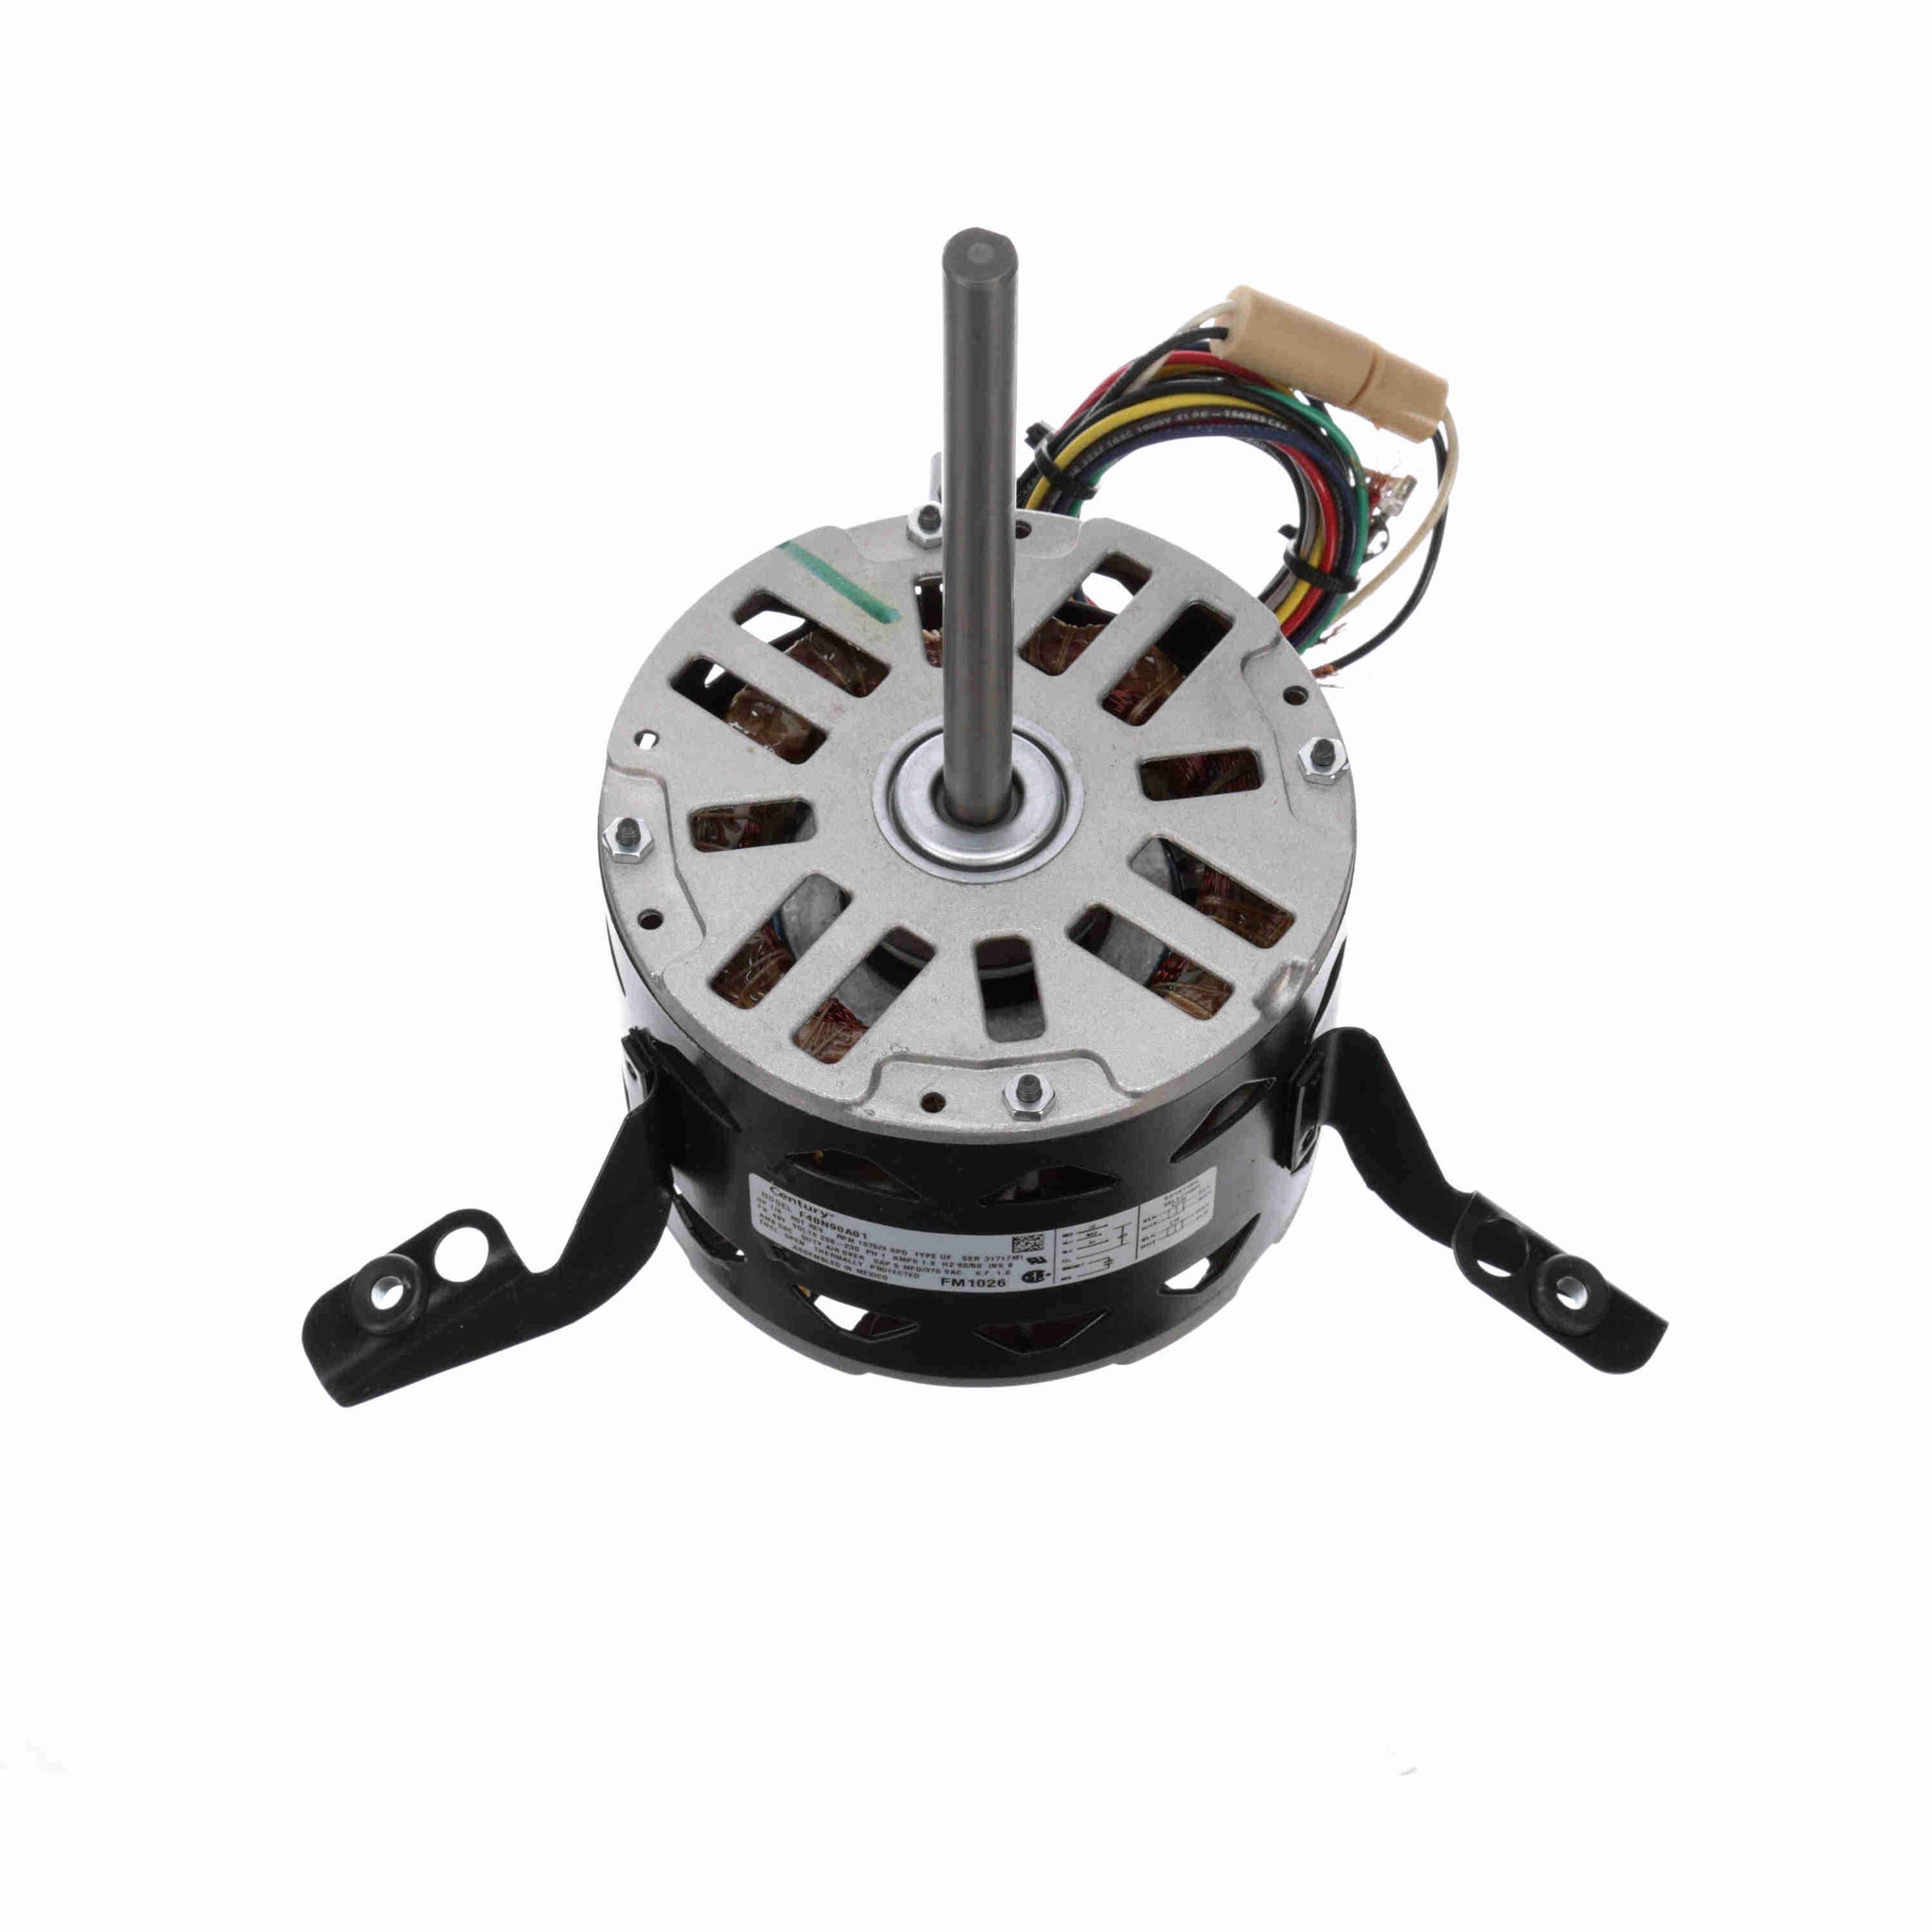 FM1026 - 1/4 HP Fan Coil / Room Air Conditioner Motor, 1075 RPM, 3 Speed, 208-230 Volts, 48 Frame, OAO - Hardware & Moreee